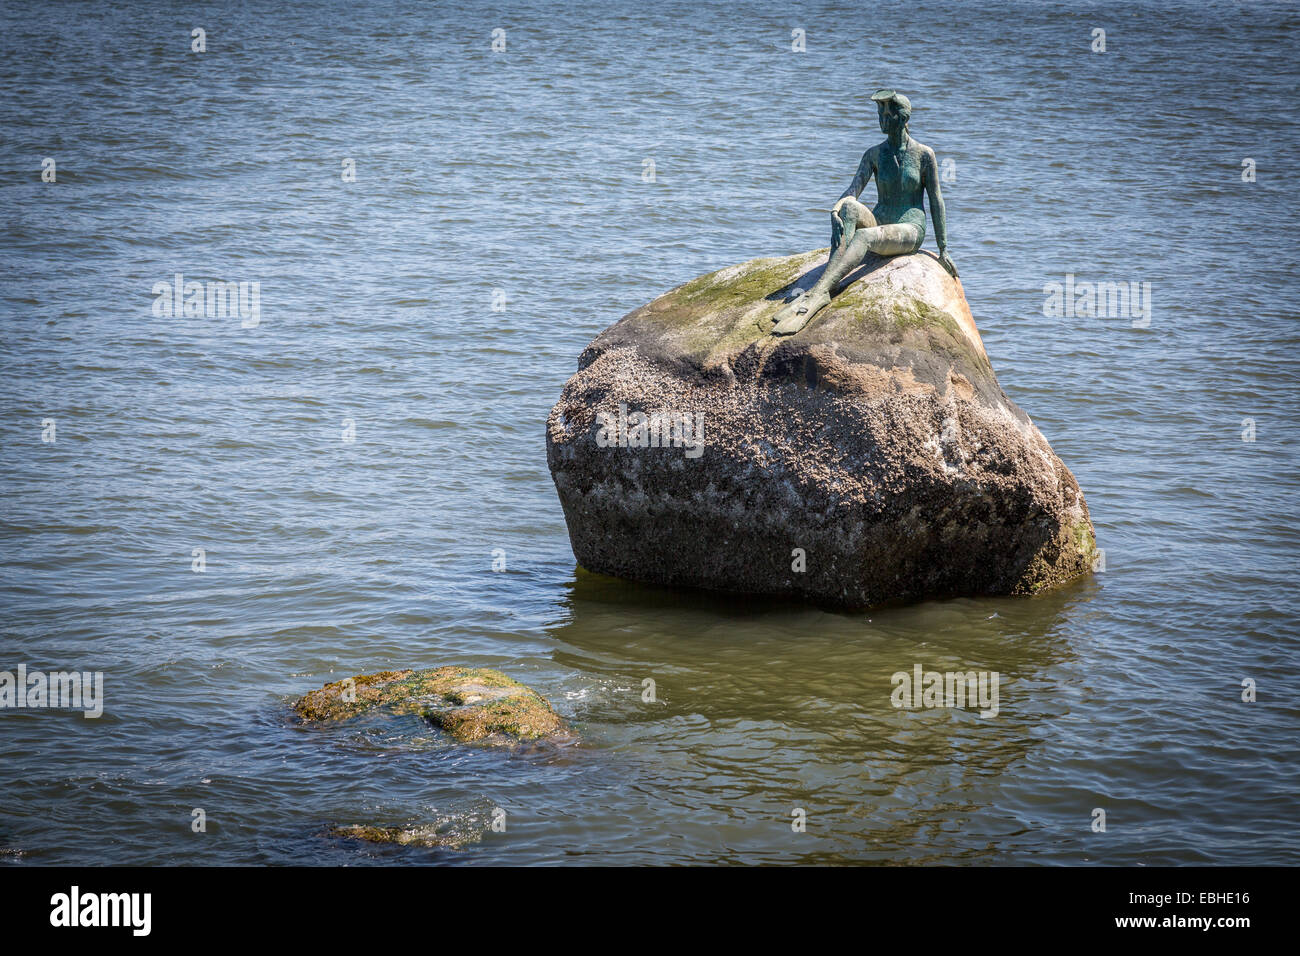 Girl in a Wetsuit, Stanley Park, Vancouver, British Columbia, Canada, North America. Stock Photo